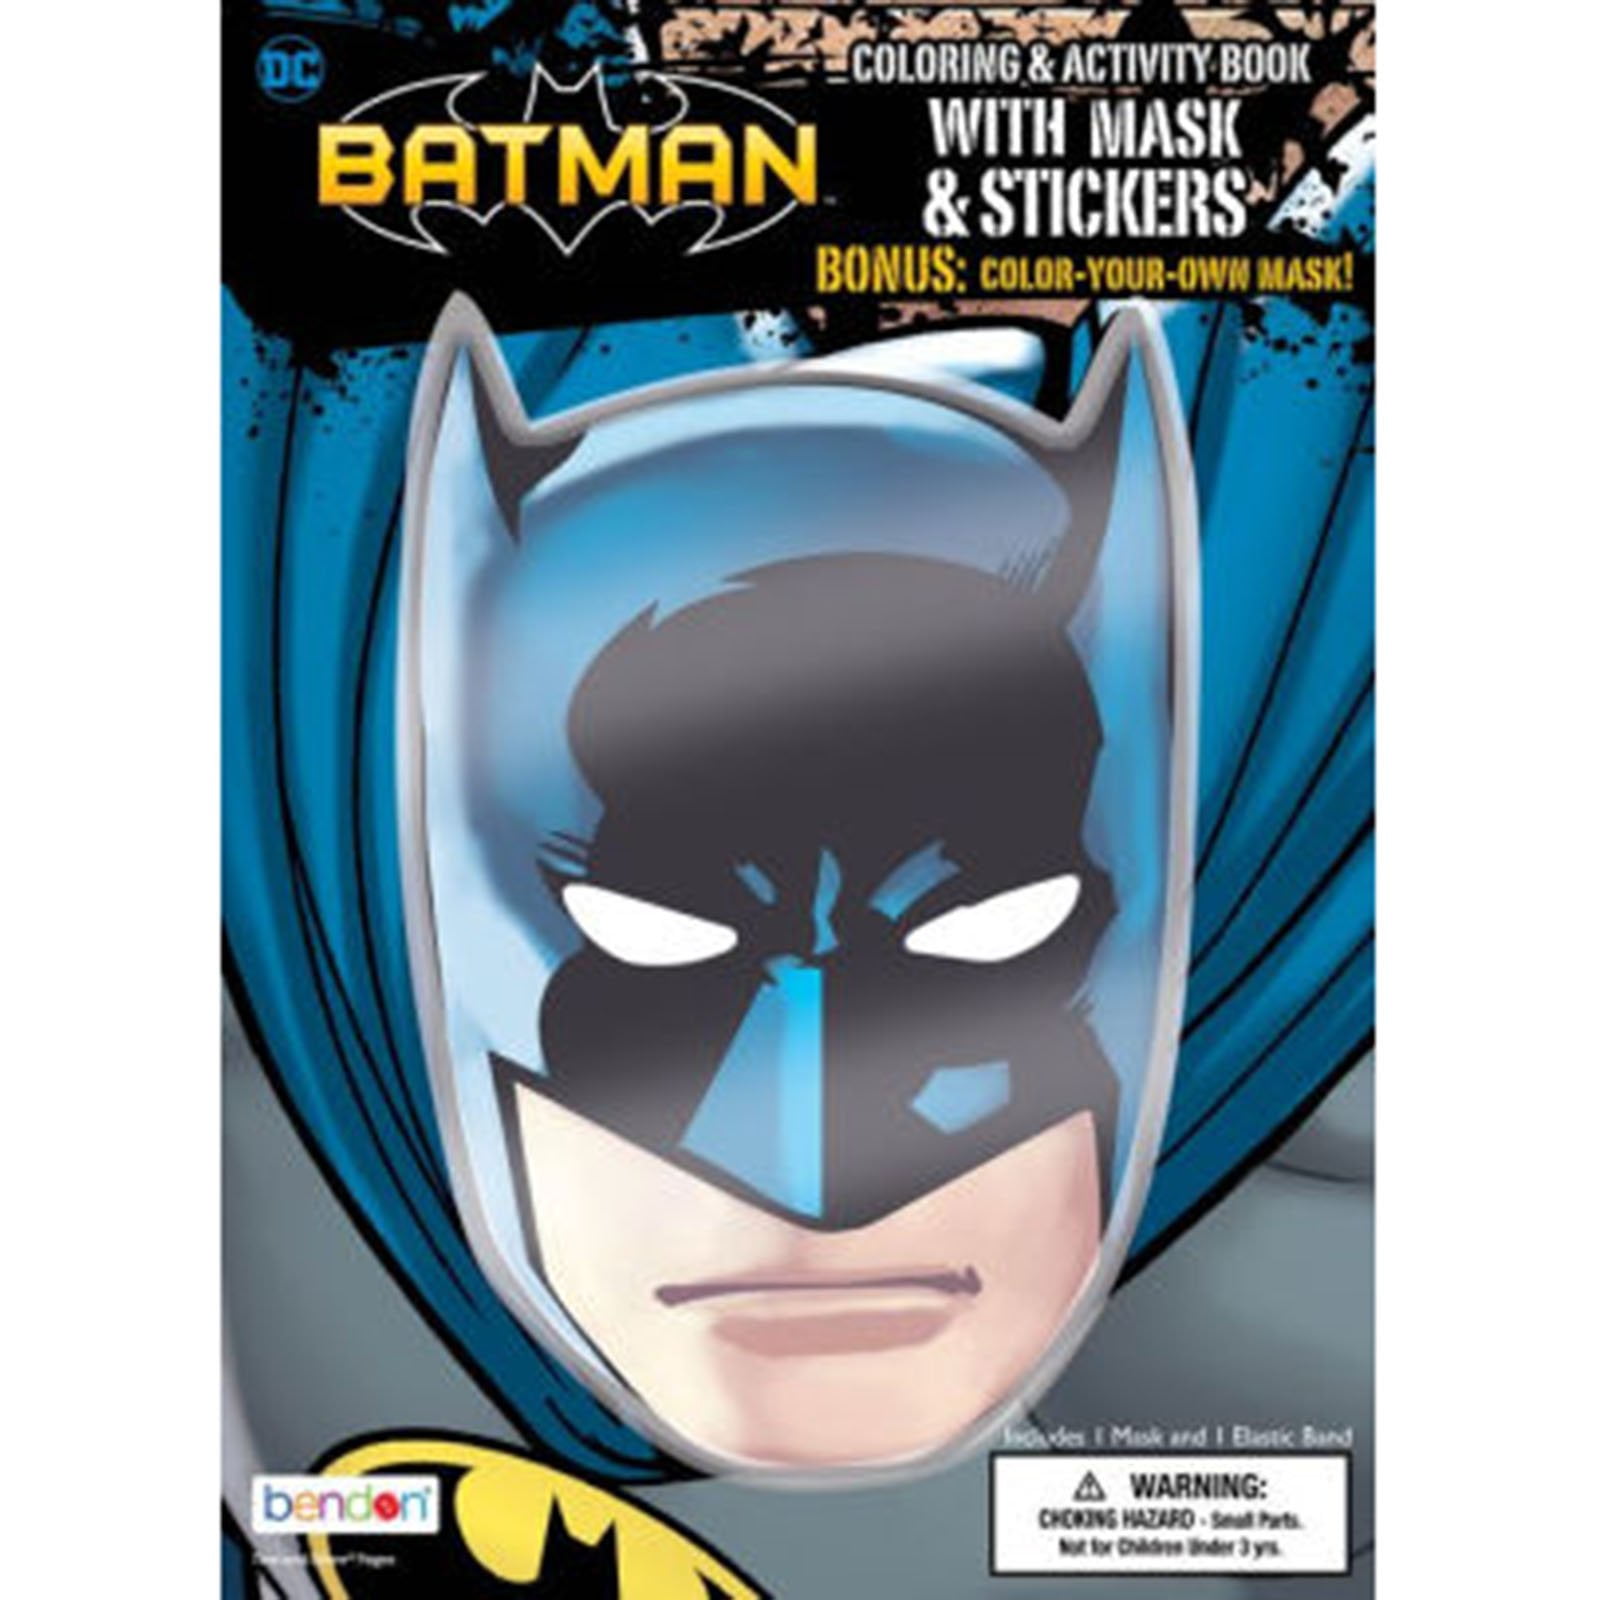 BATMAN COLORING BOOK WITH MASK by BENDON, Paperback